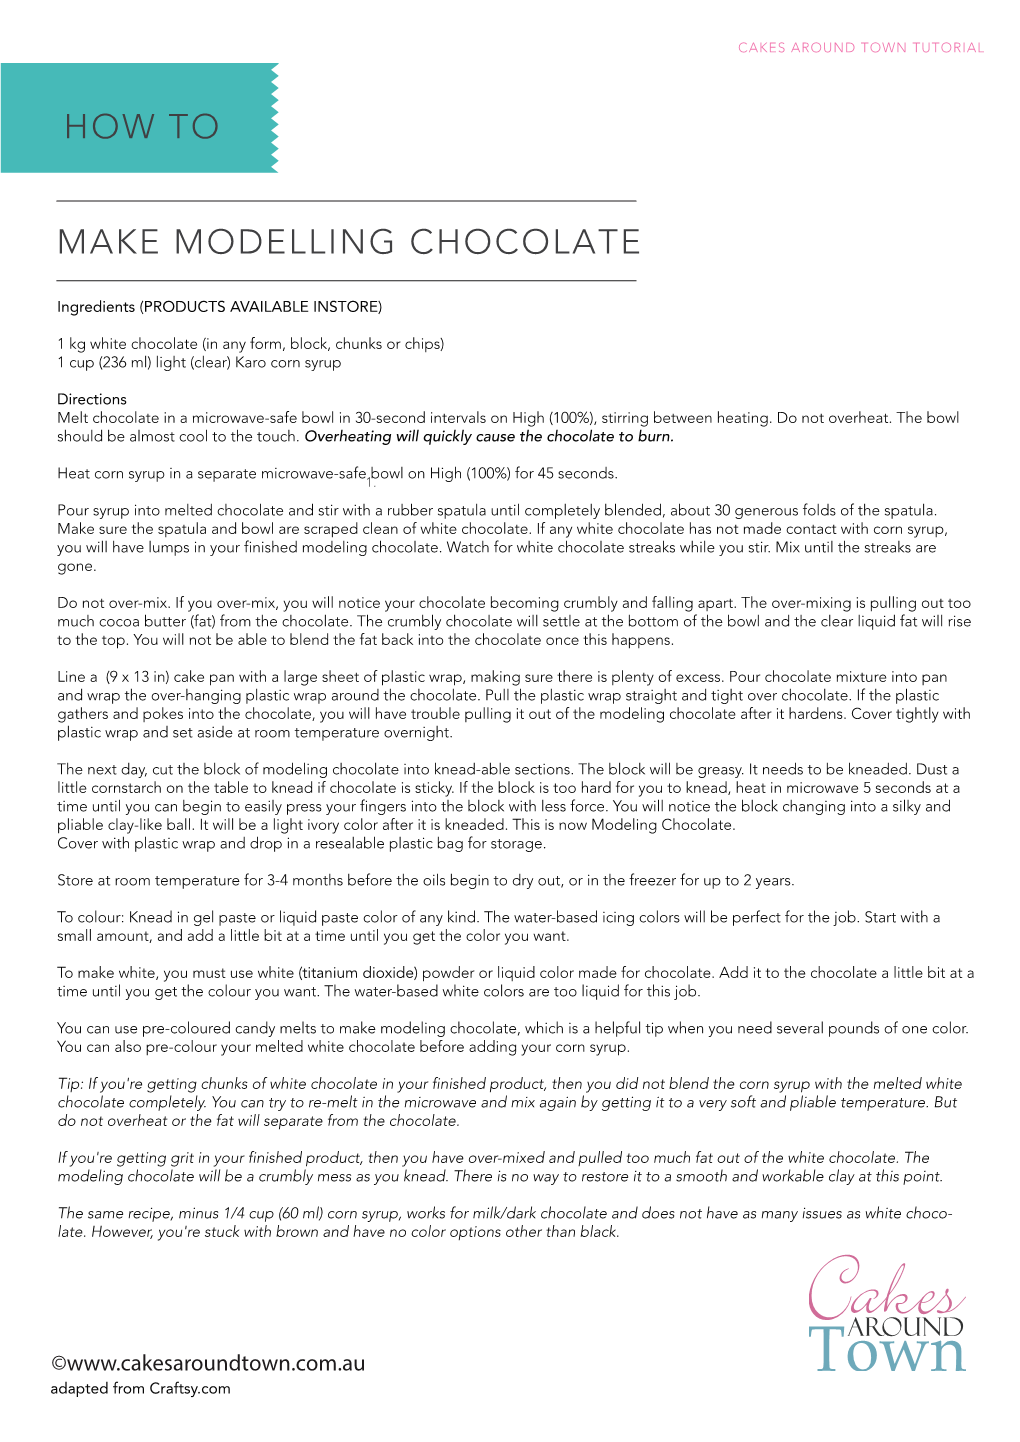 Make Modelling Chocolate How To